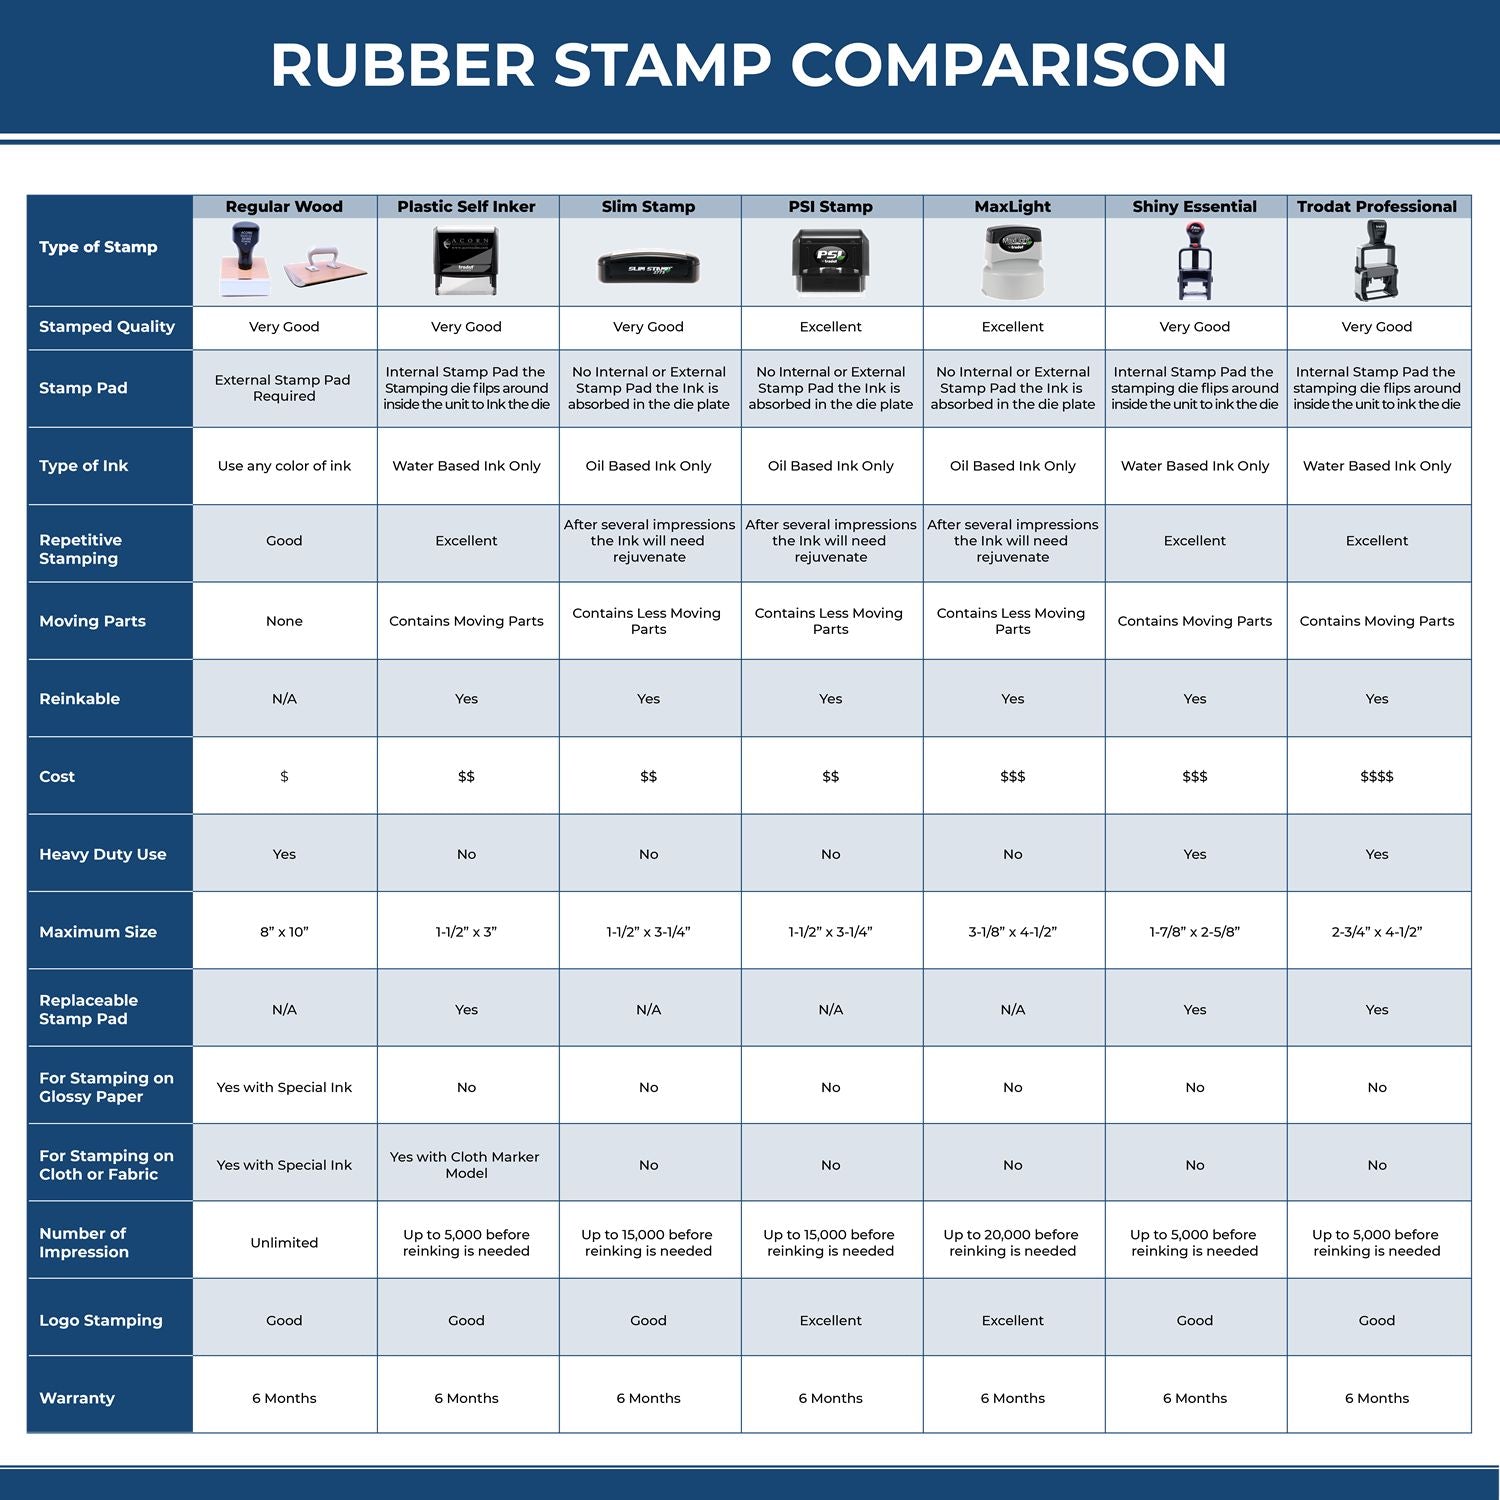 A comparison chart for the different types of mount models available for the Iowa Professional Engineer Seal Stamp.